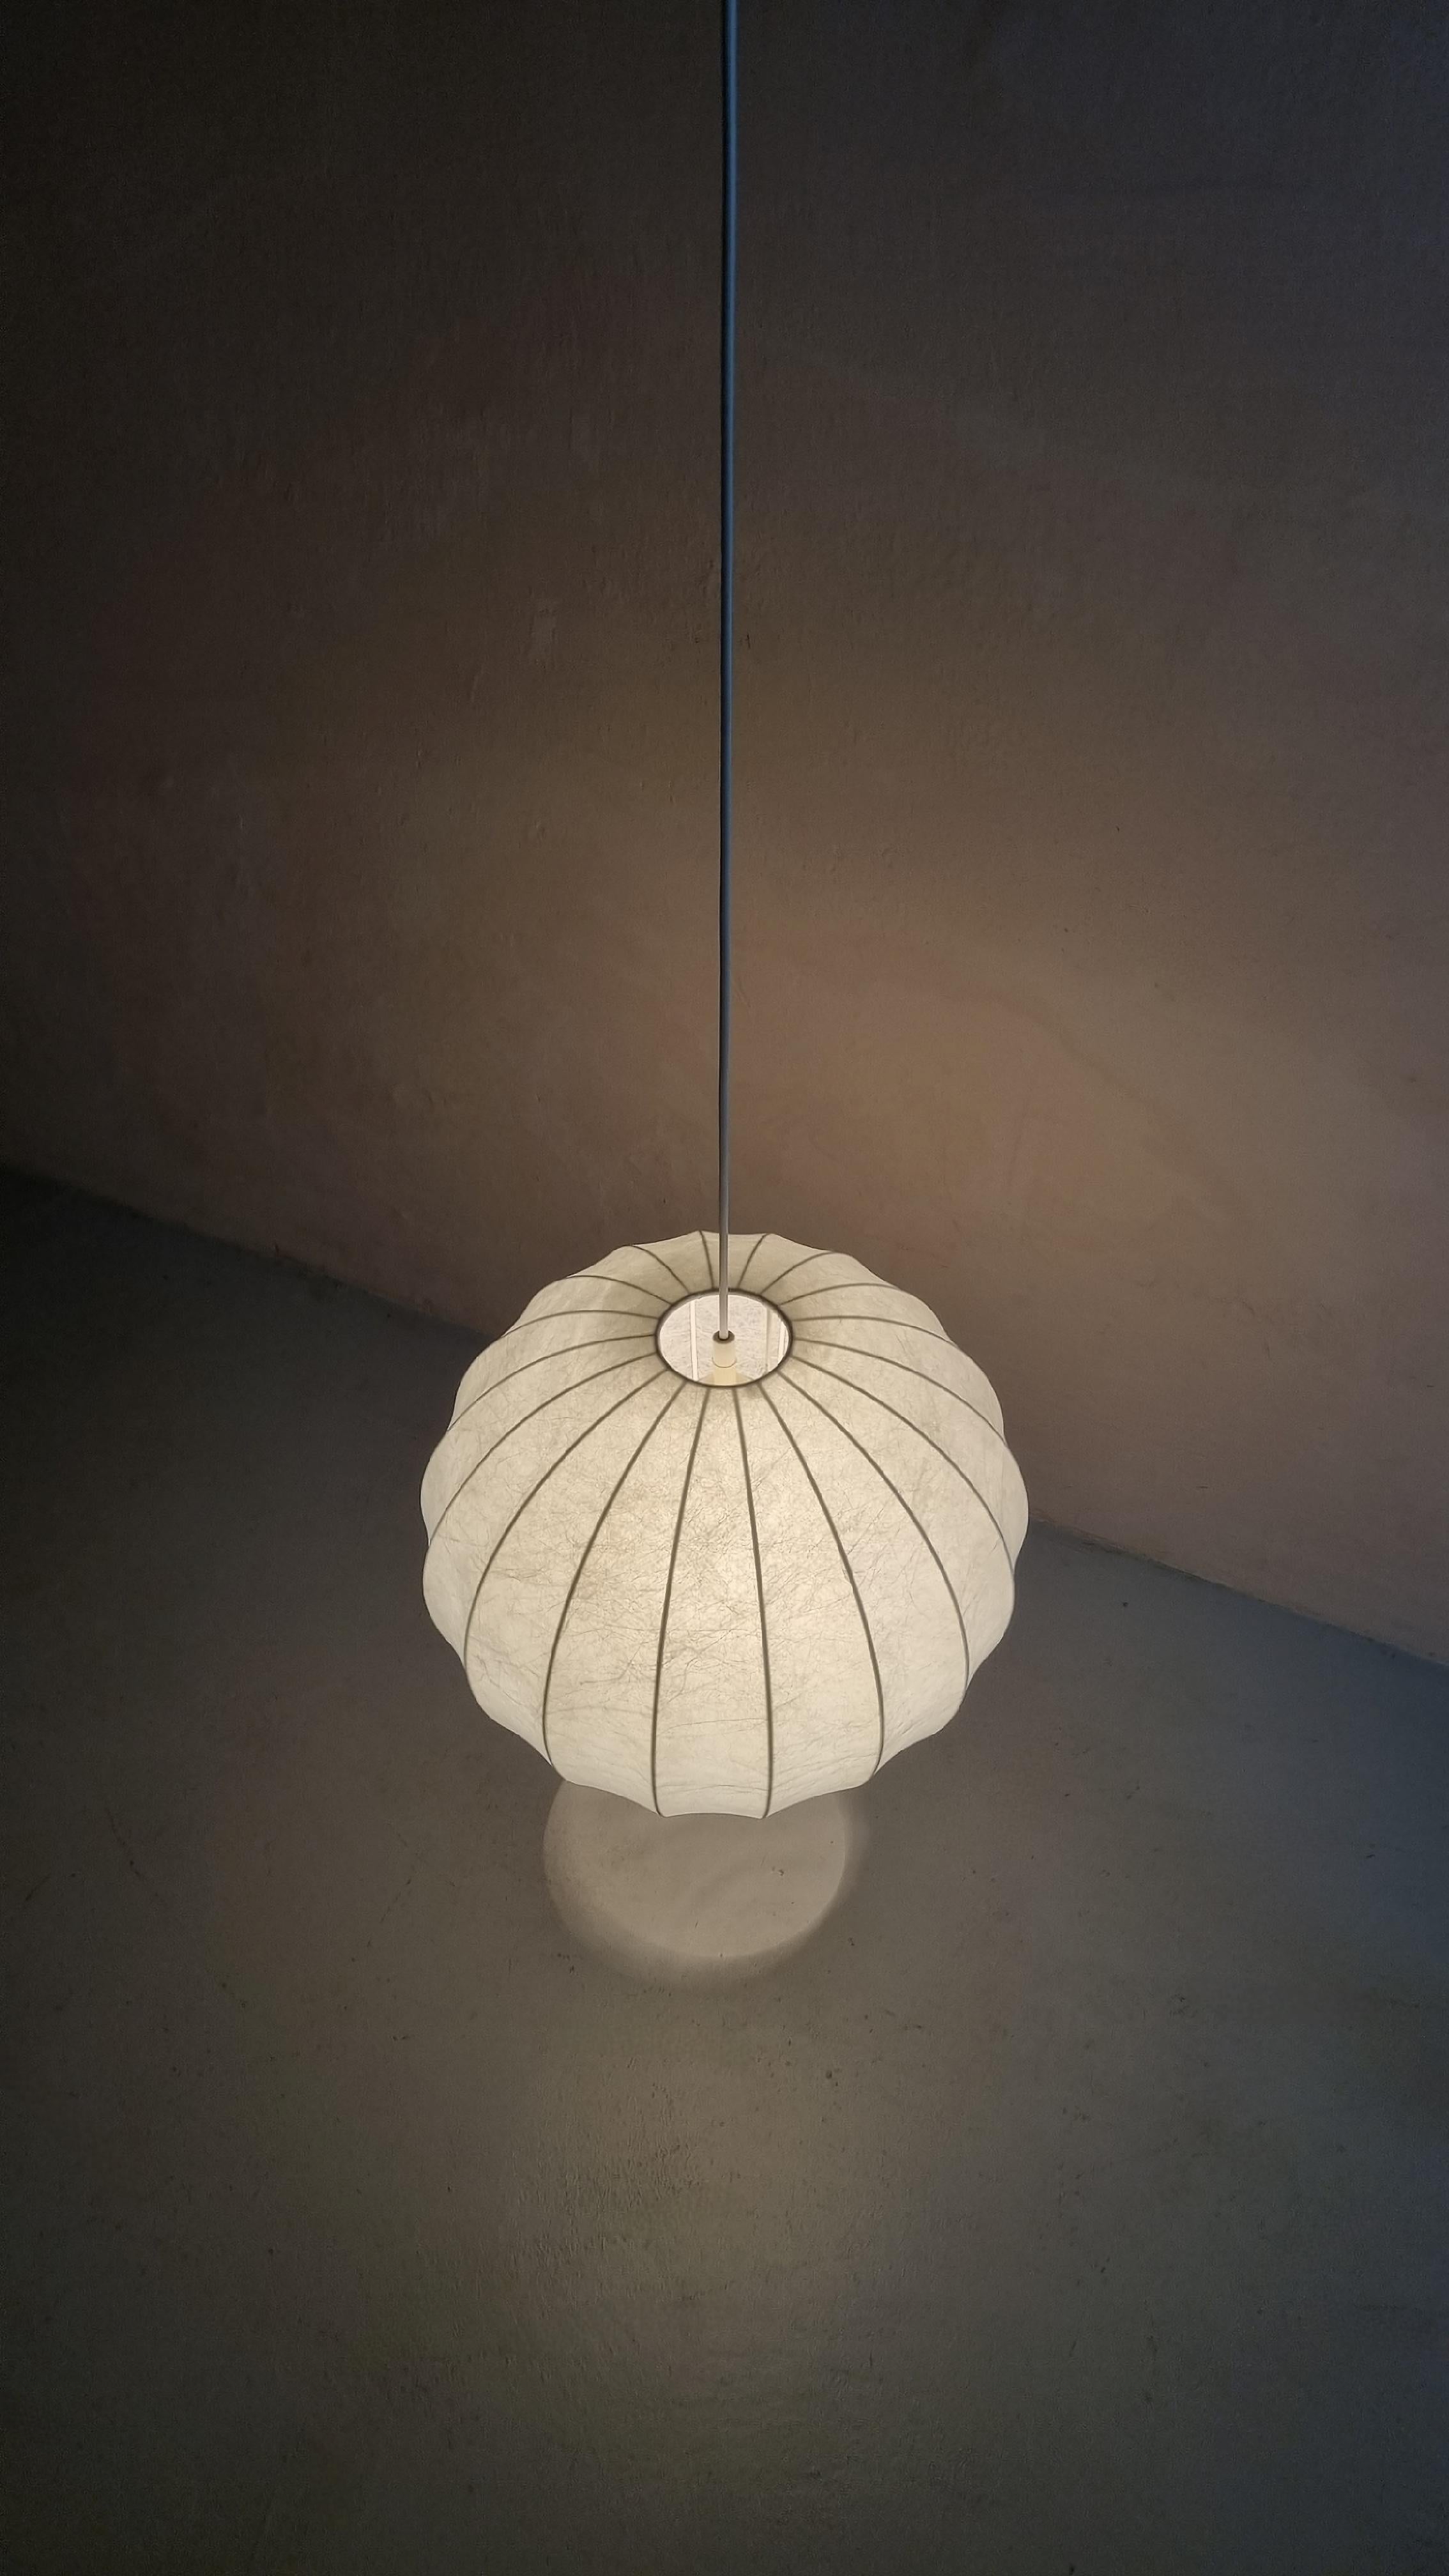 Cocoon suspension lamp, 1960s.
White coated internal steel structure, sprayed with special cocoon resin.
Excellent condition.